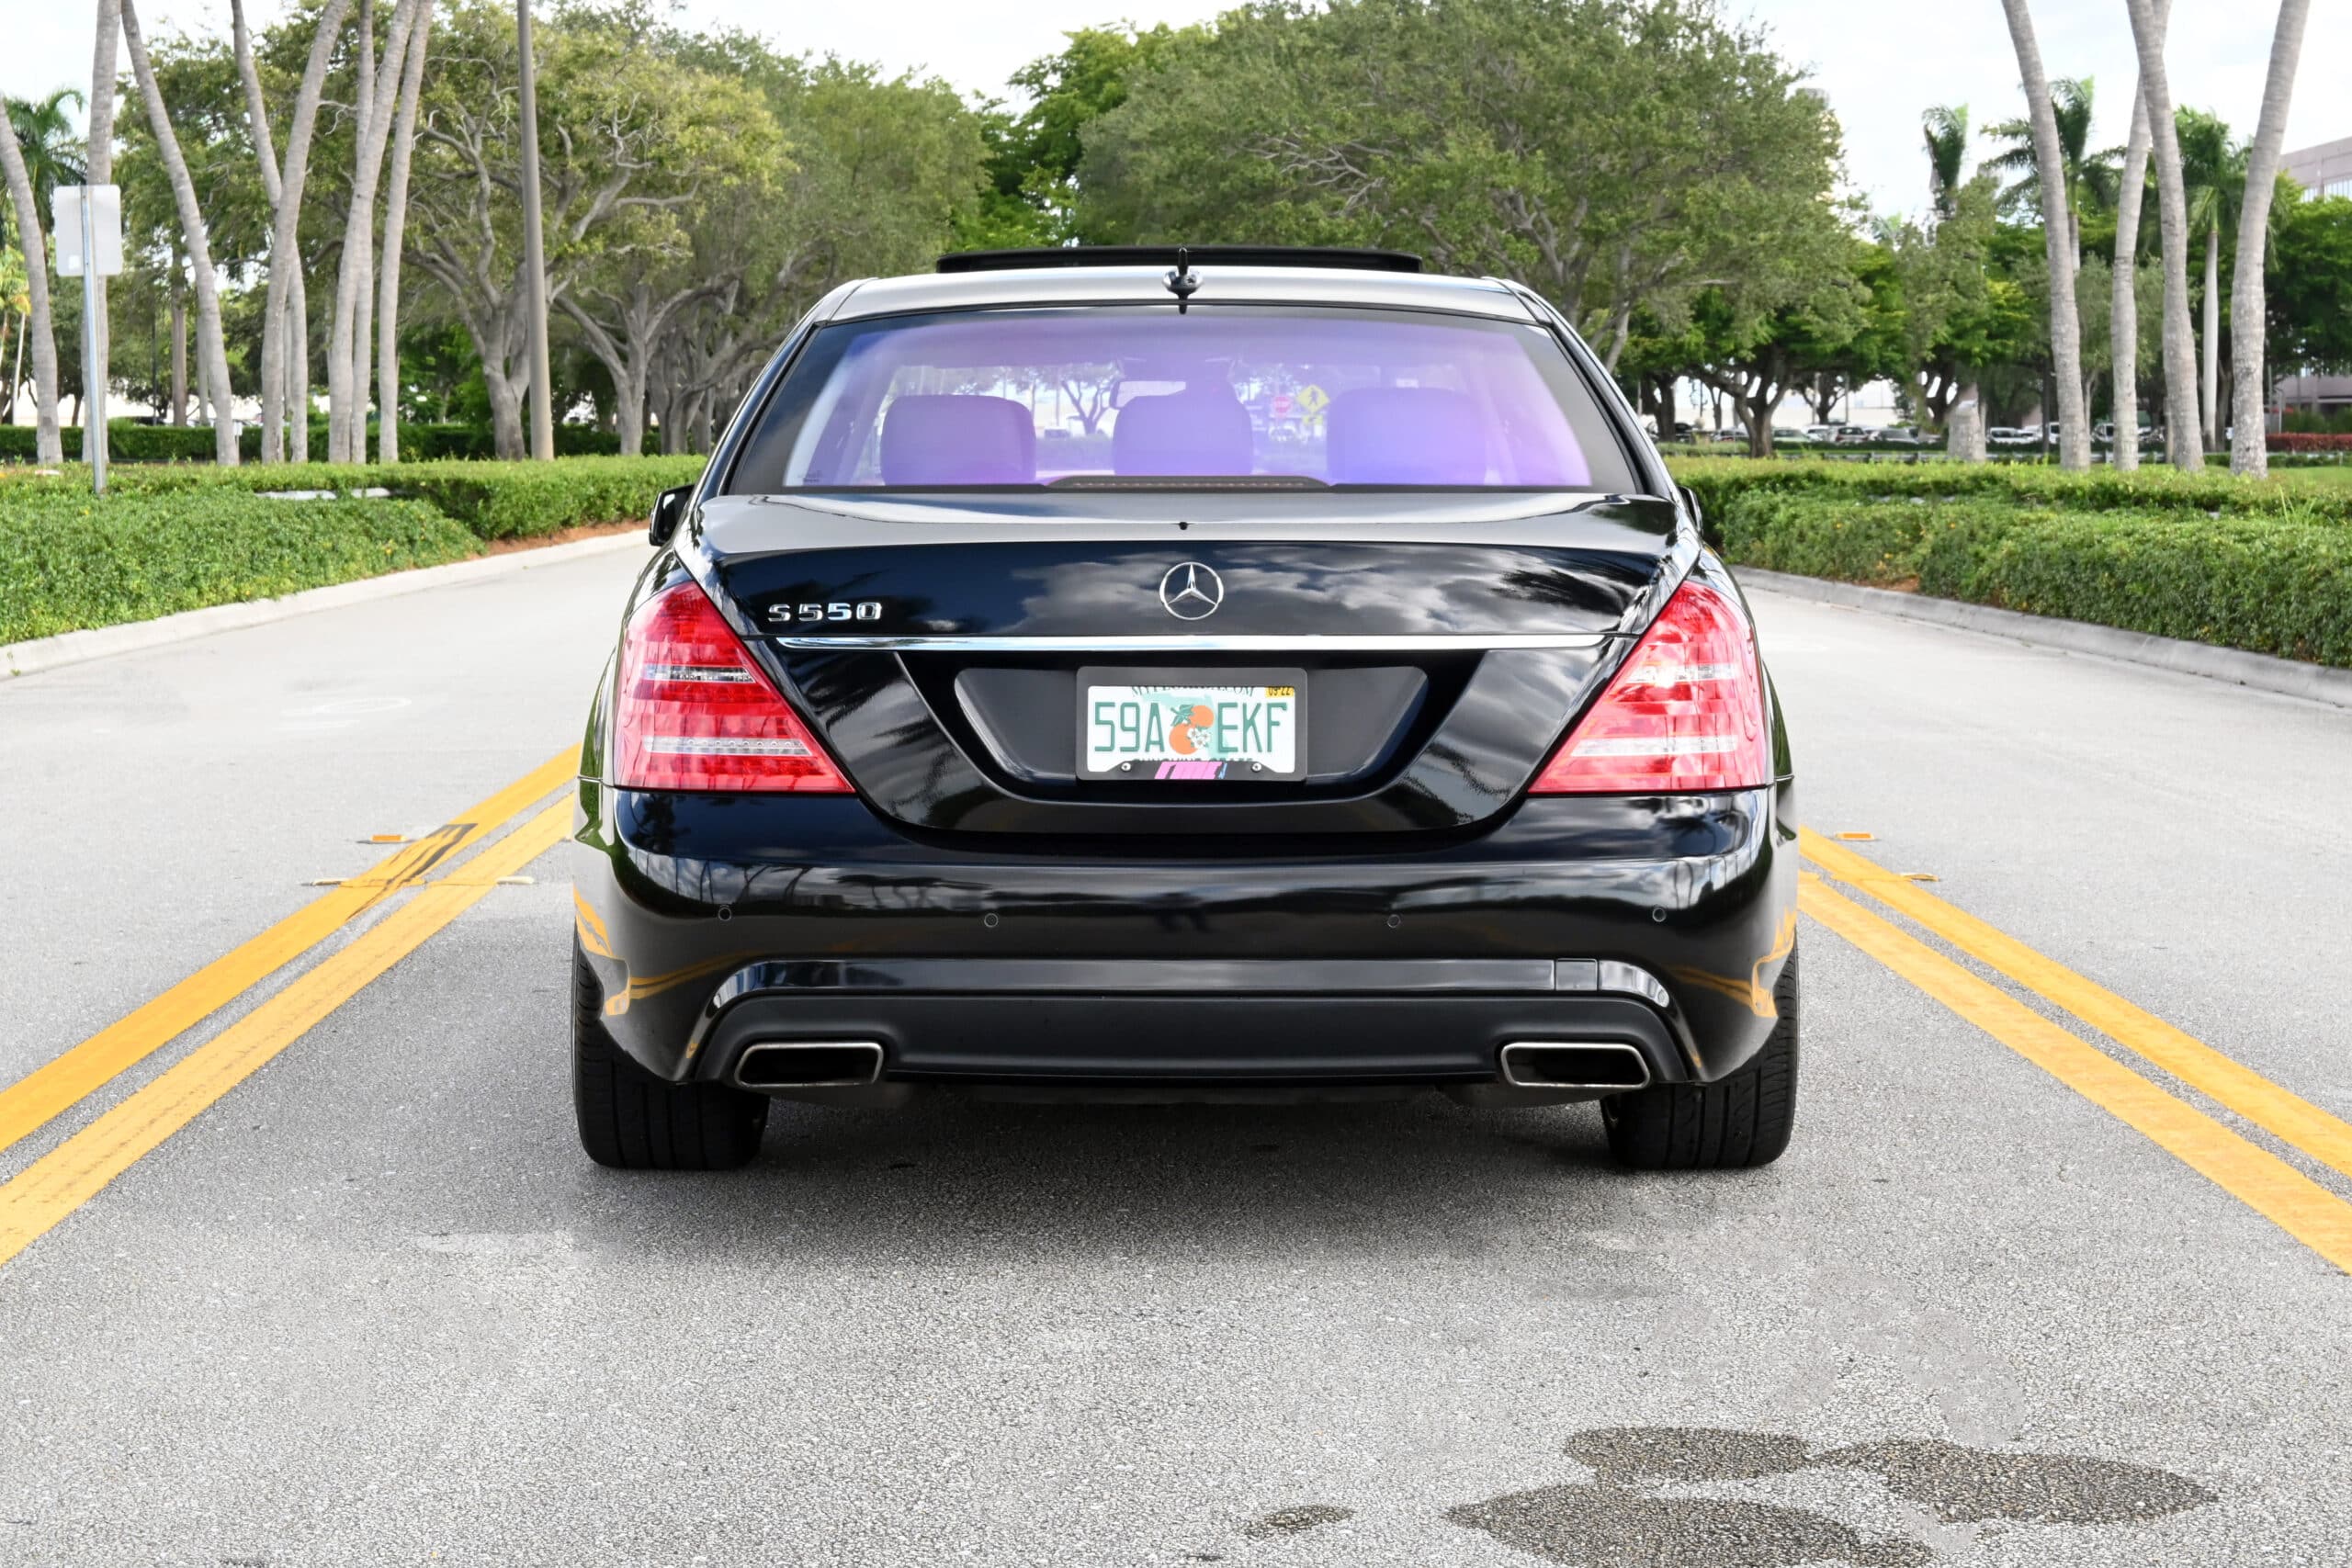 2013 MERCEDES S550, LOW MILES, SERVICED, S63 AMG WHEELS, LOADED WITH OPTIONS, FRESHLY SEVICED